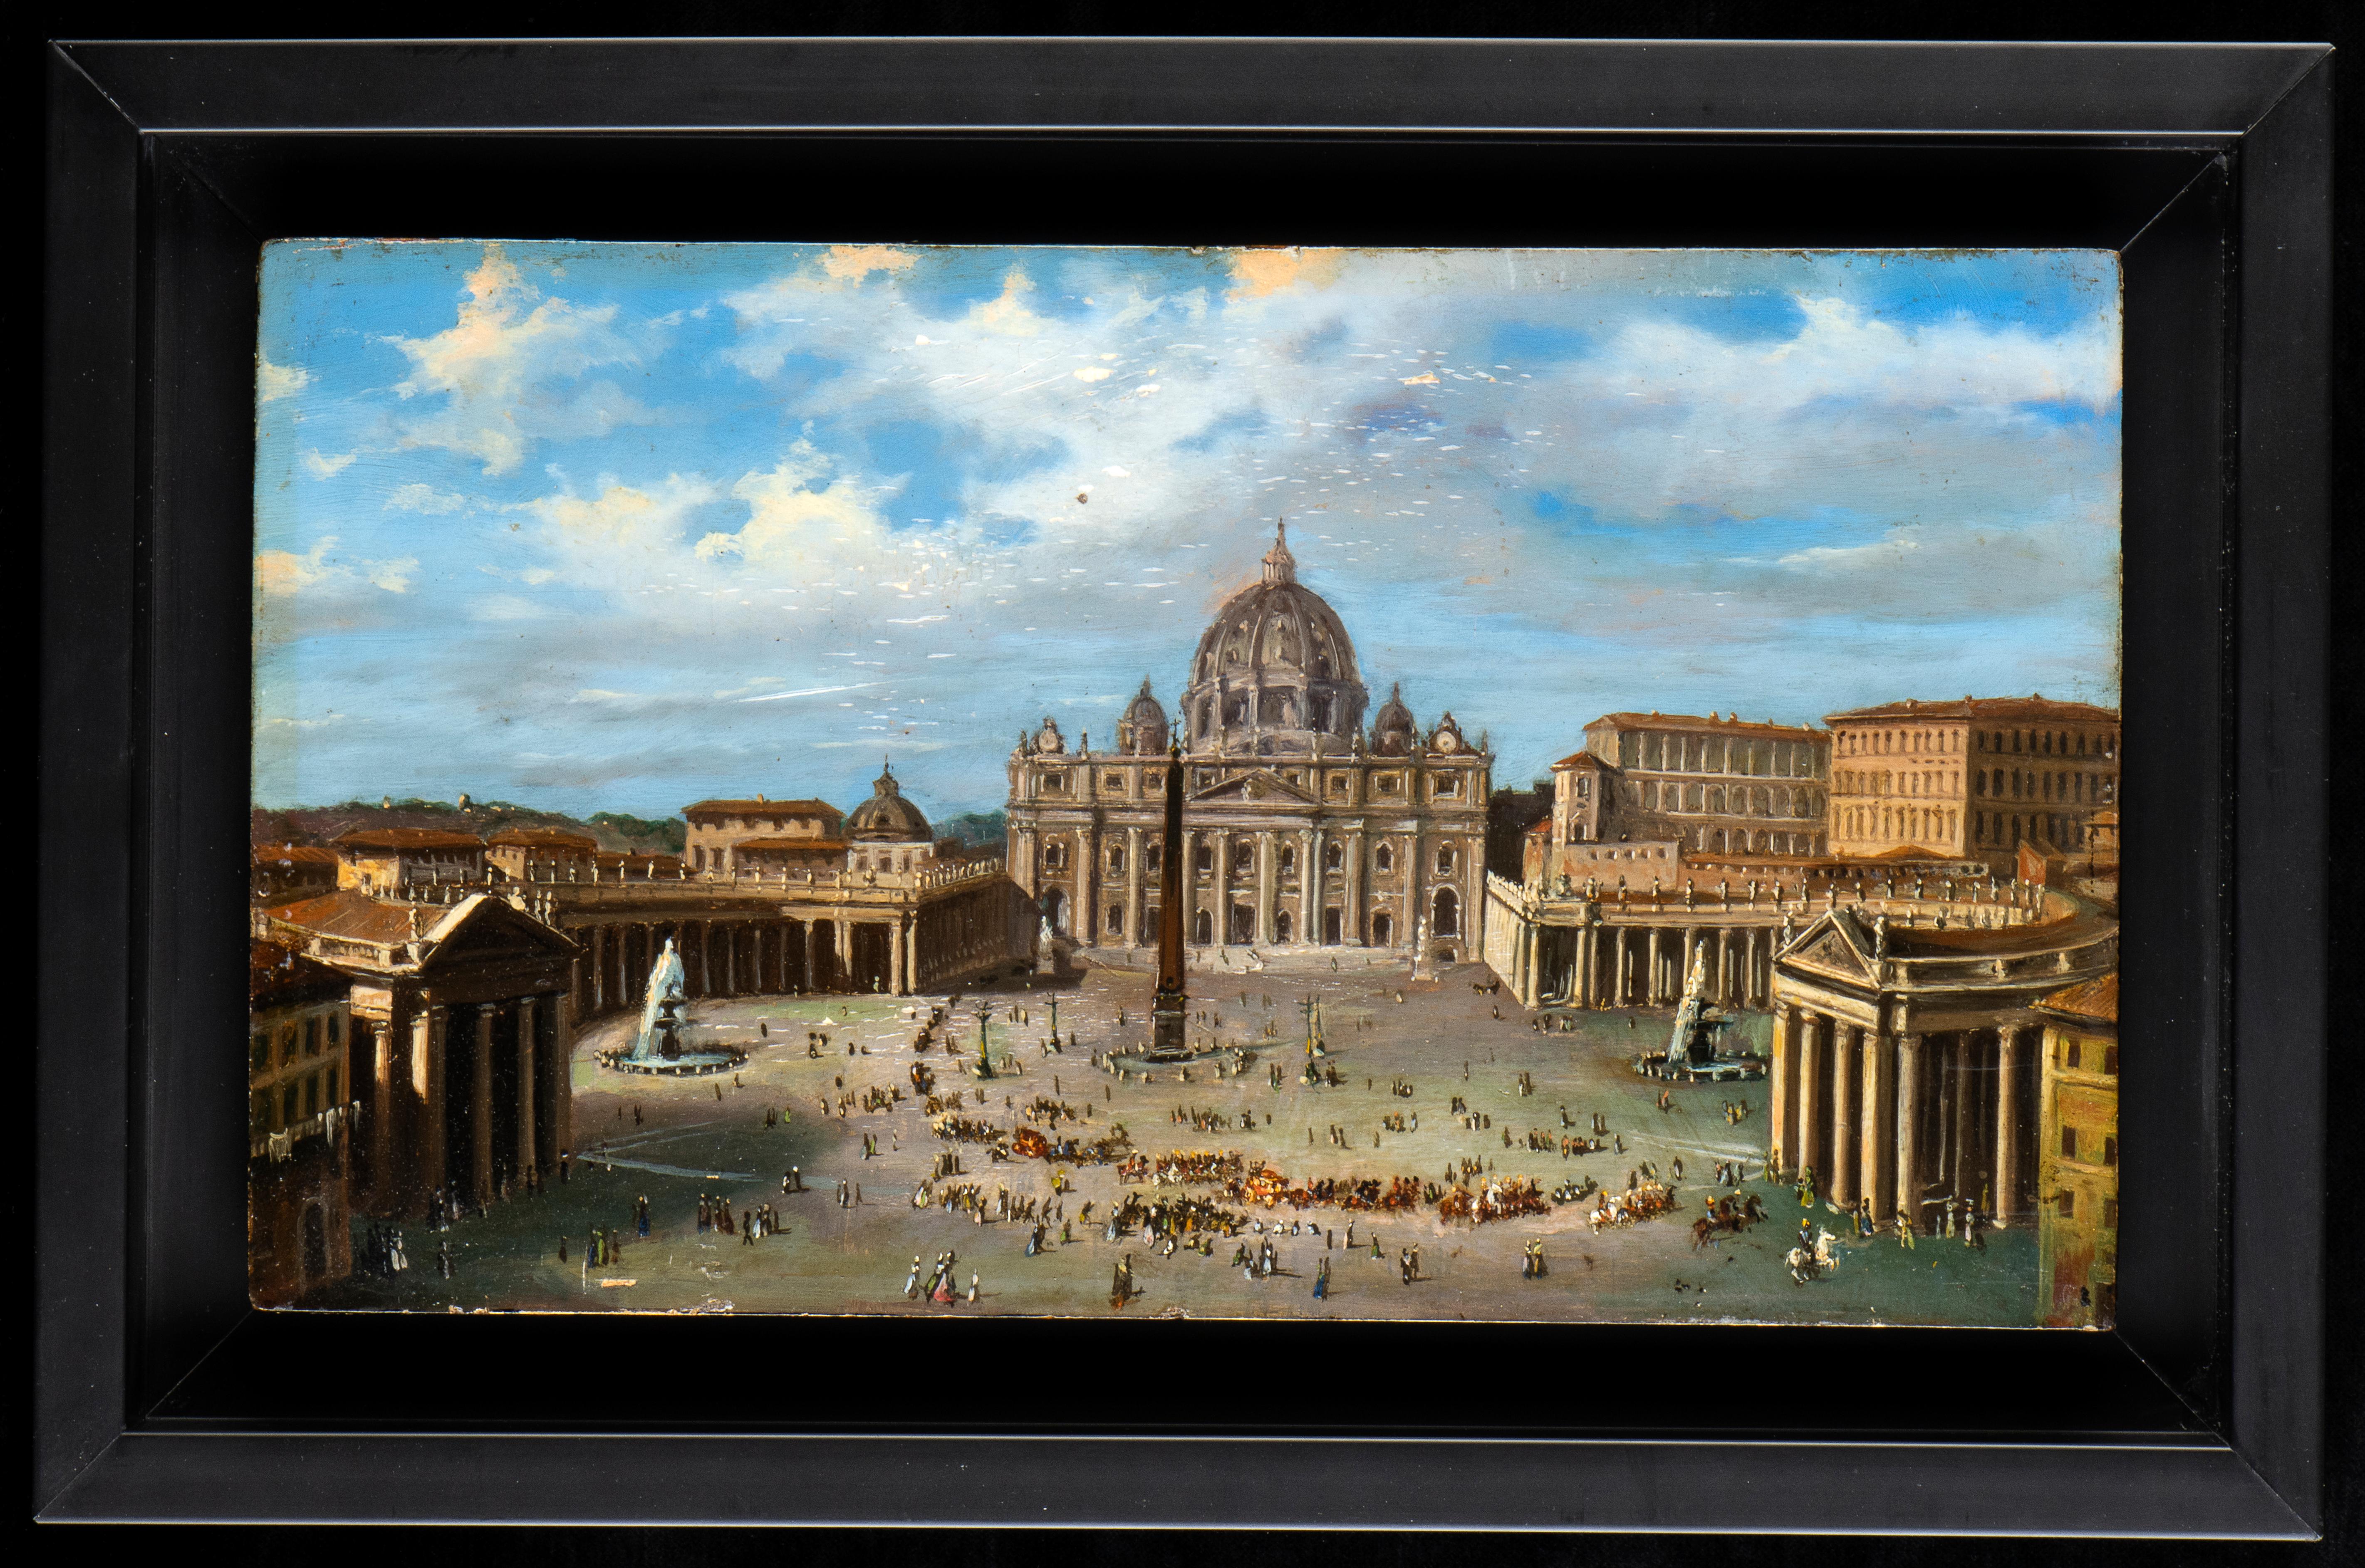 Oil Paint View Of St. Peter's Basilica With The Square and Colonnade and Obelisk